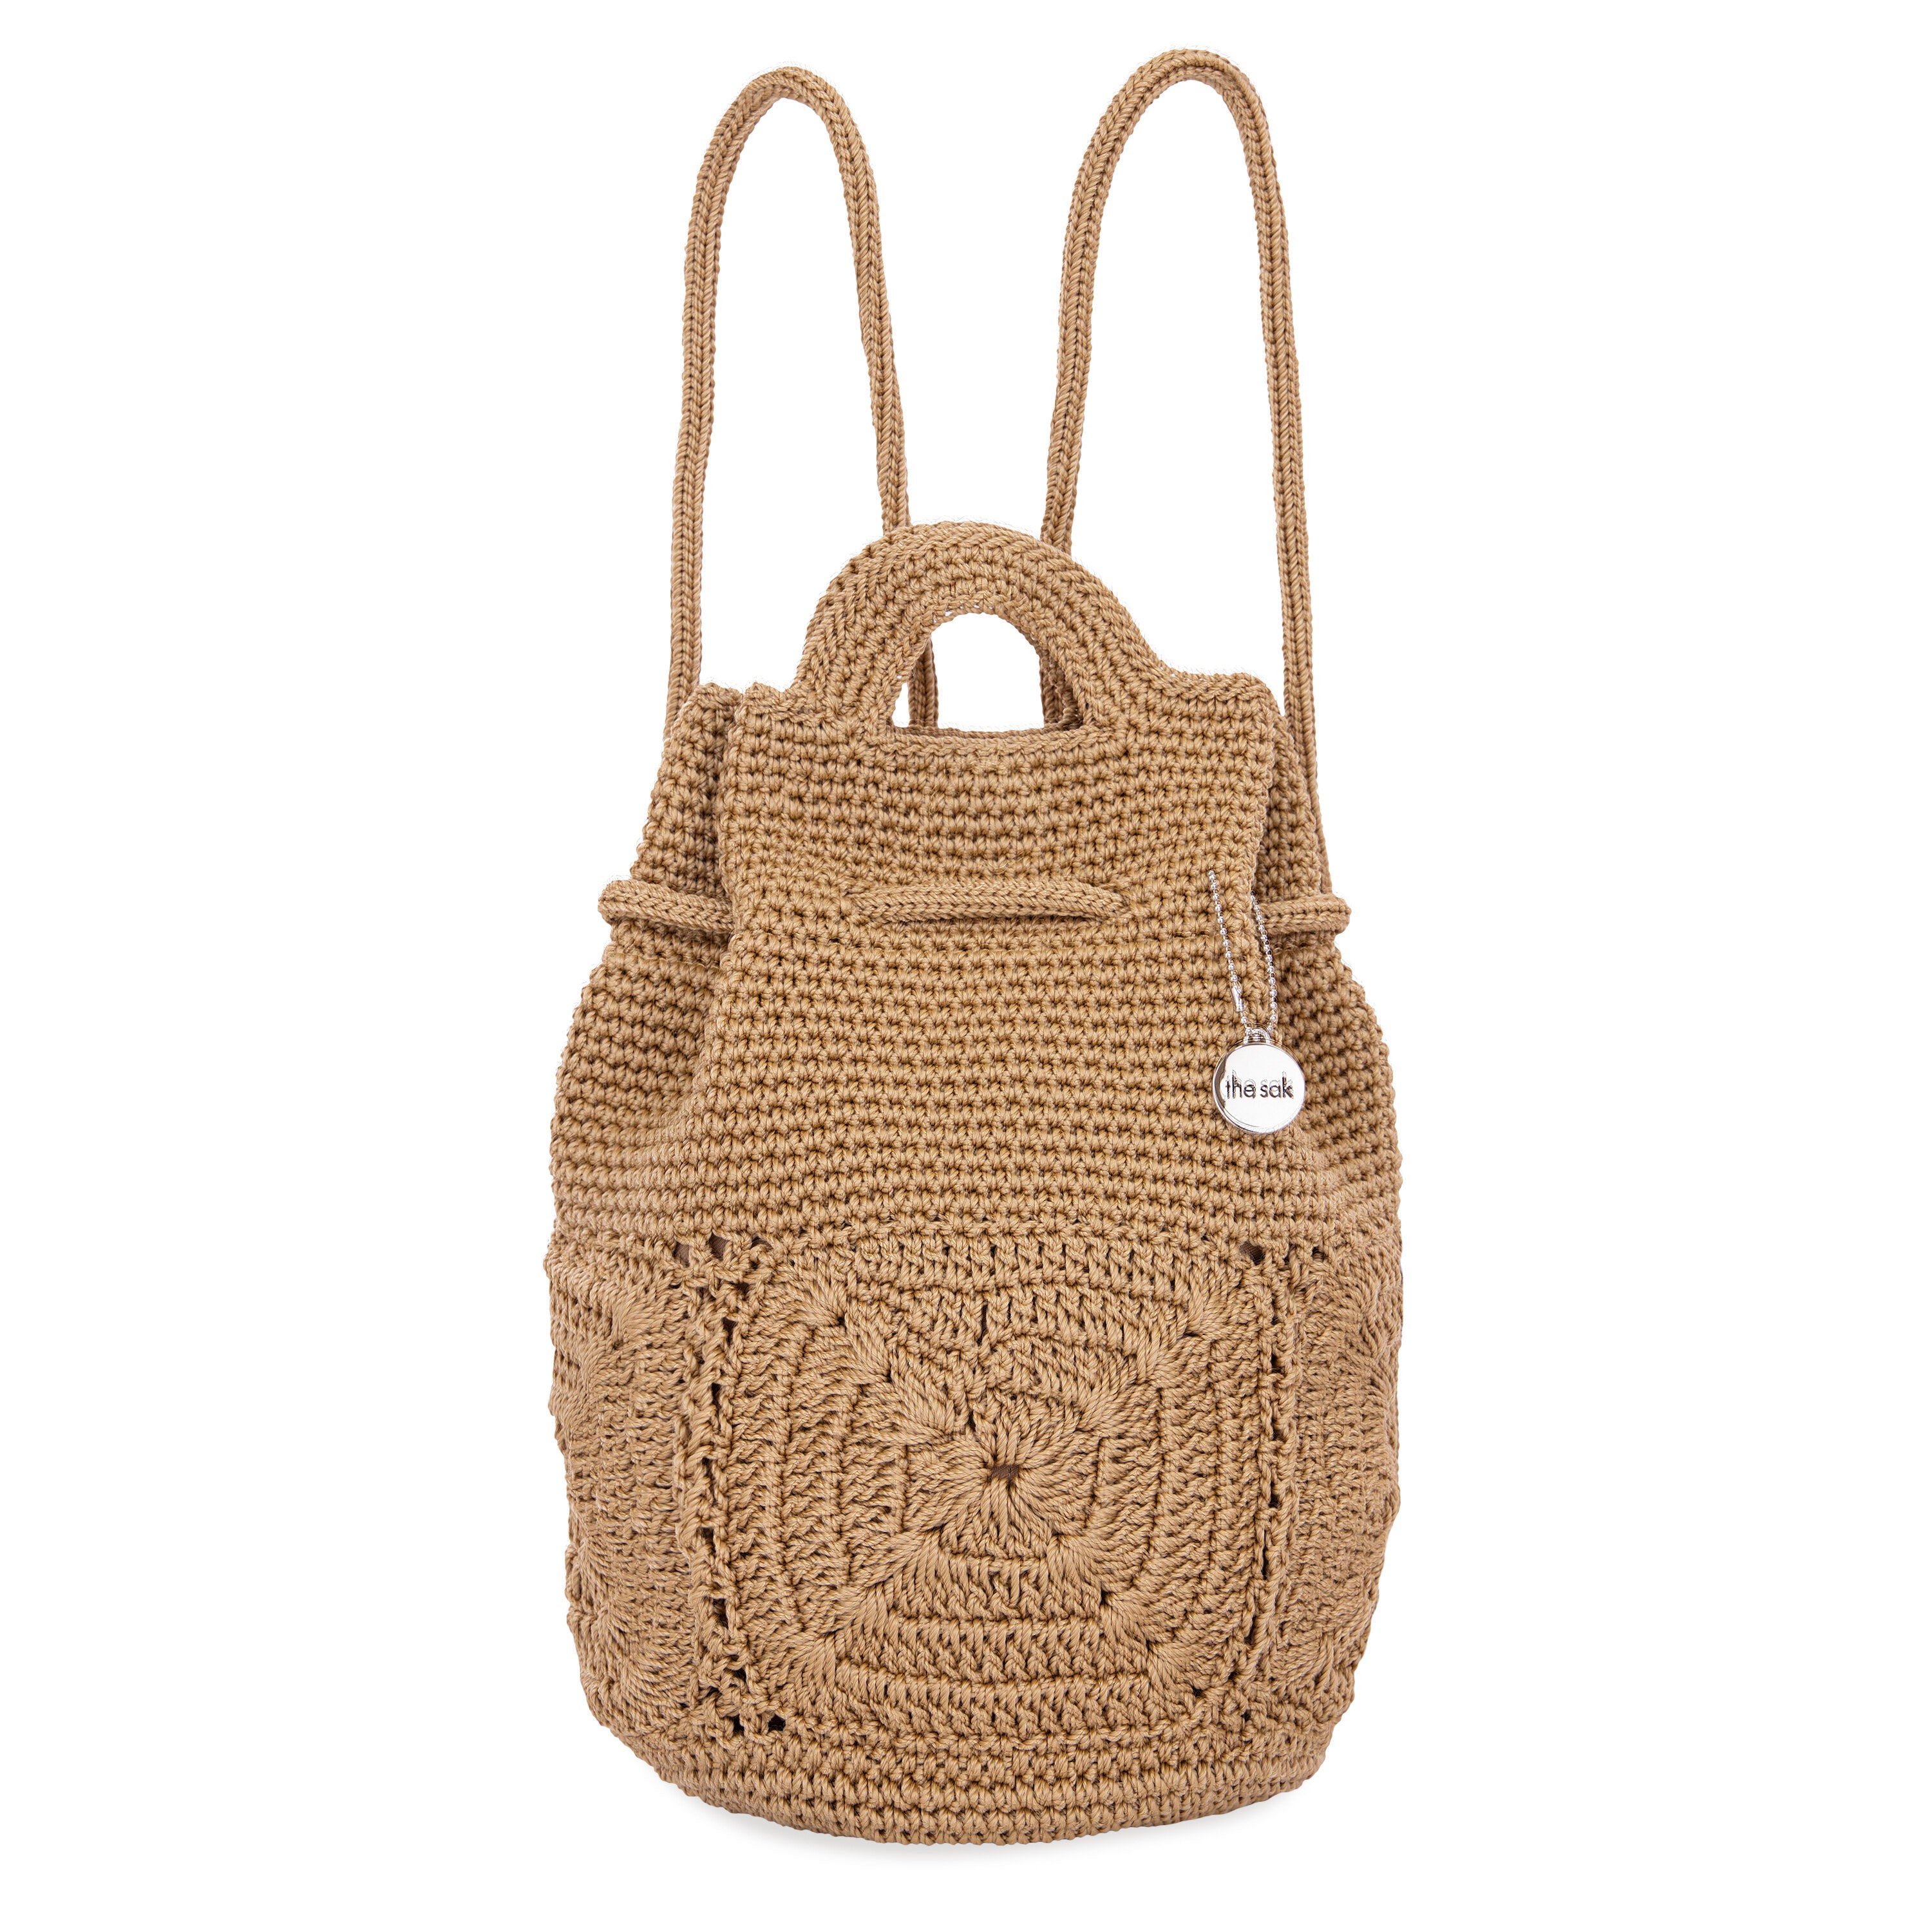 Sand Bucket Backpack Crochet Pattern: A Perfect Summer Accessory